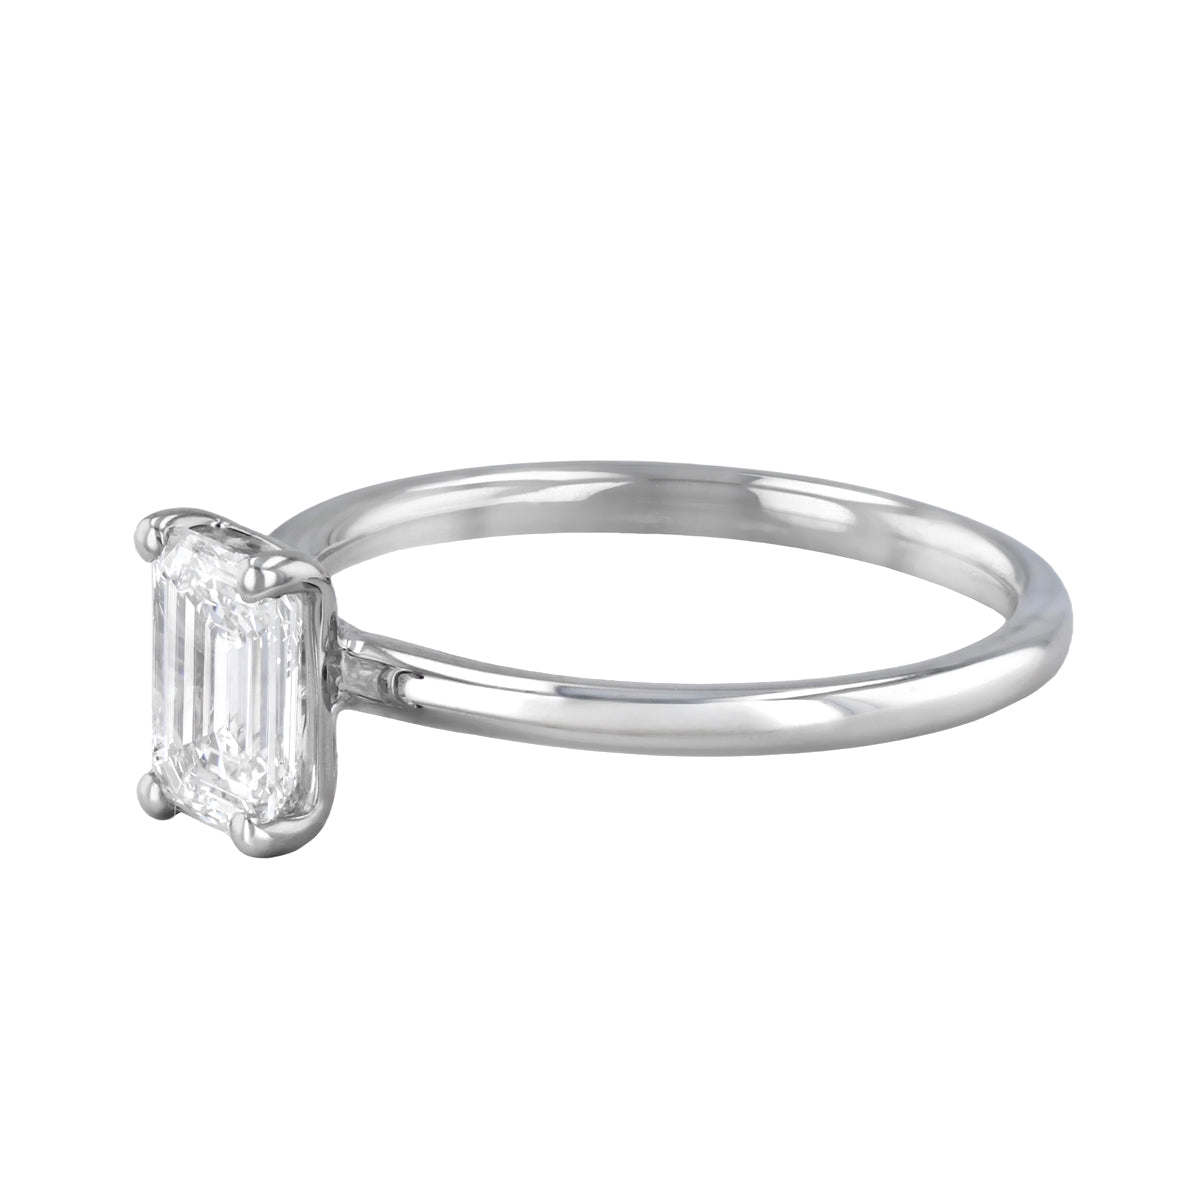 1-00ct-sofia-emerald-cut-solitaire-diamond-engagement-ring-18ct-white-gold